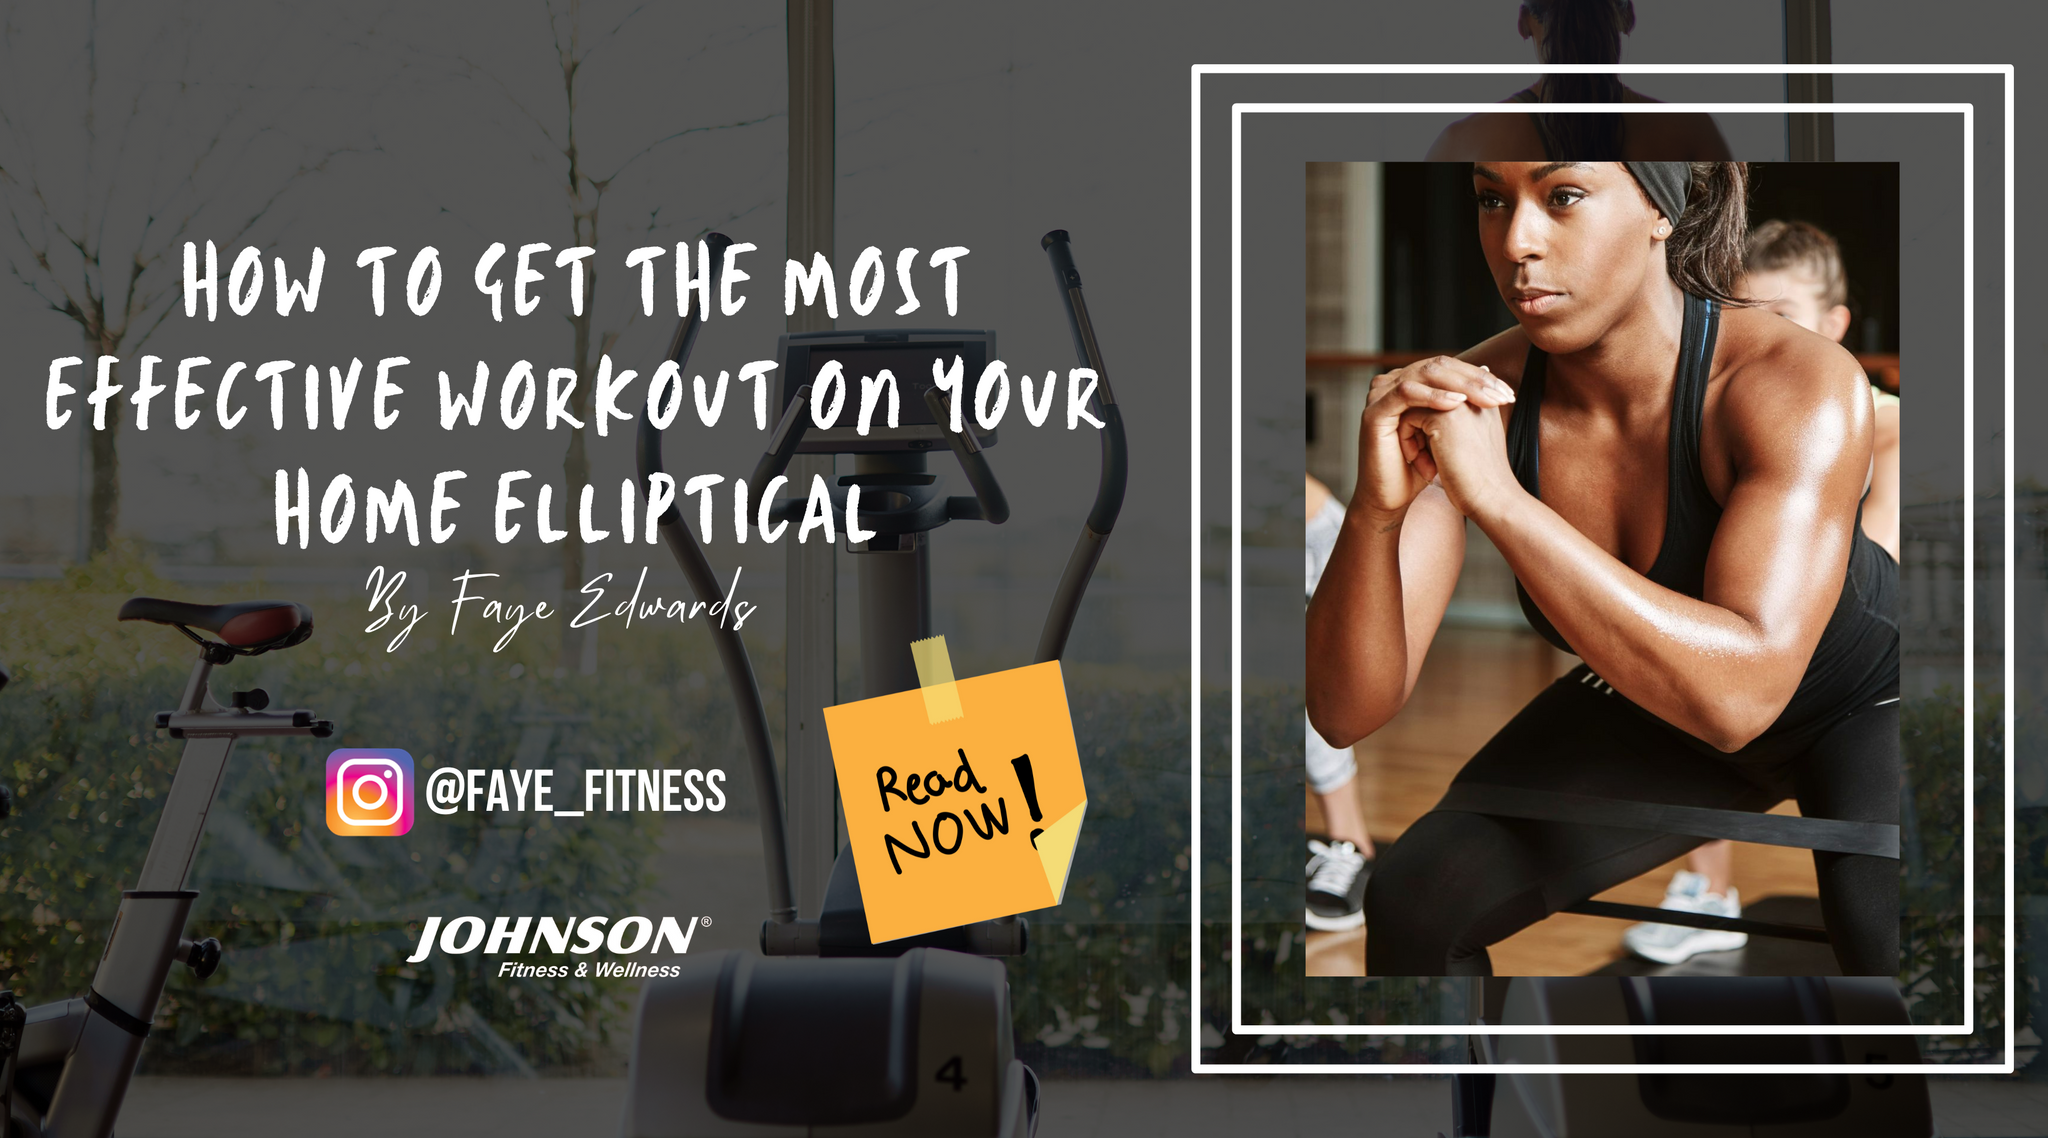 How to get the most effective workout on your home elliptical